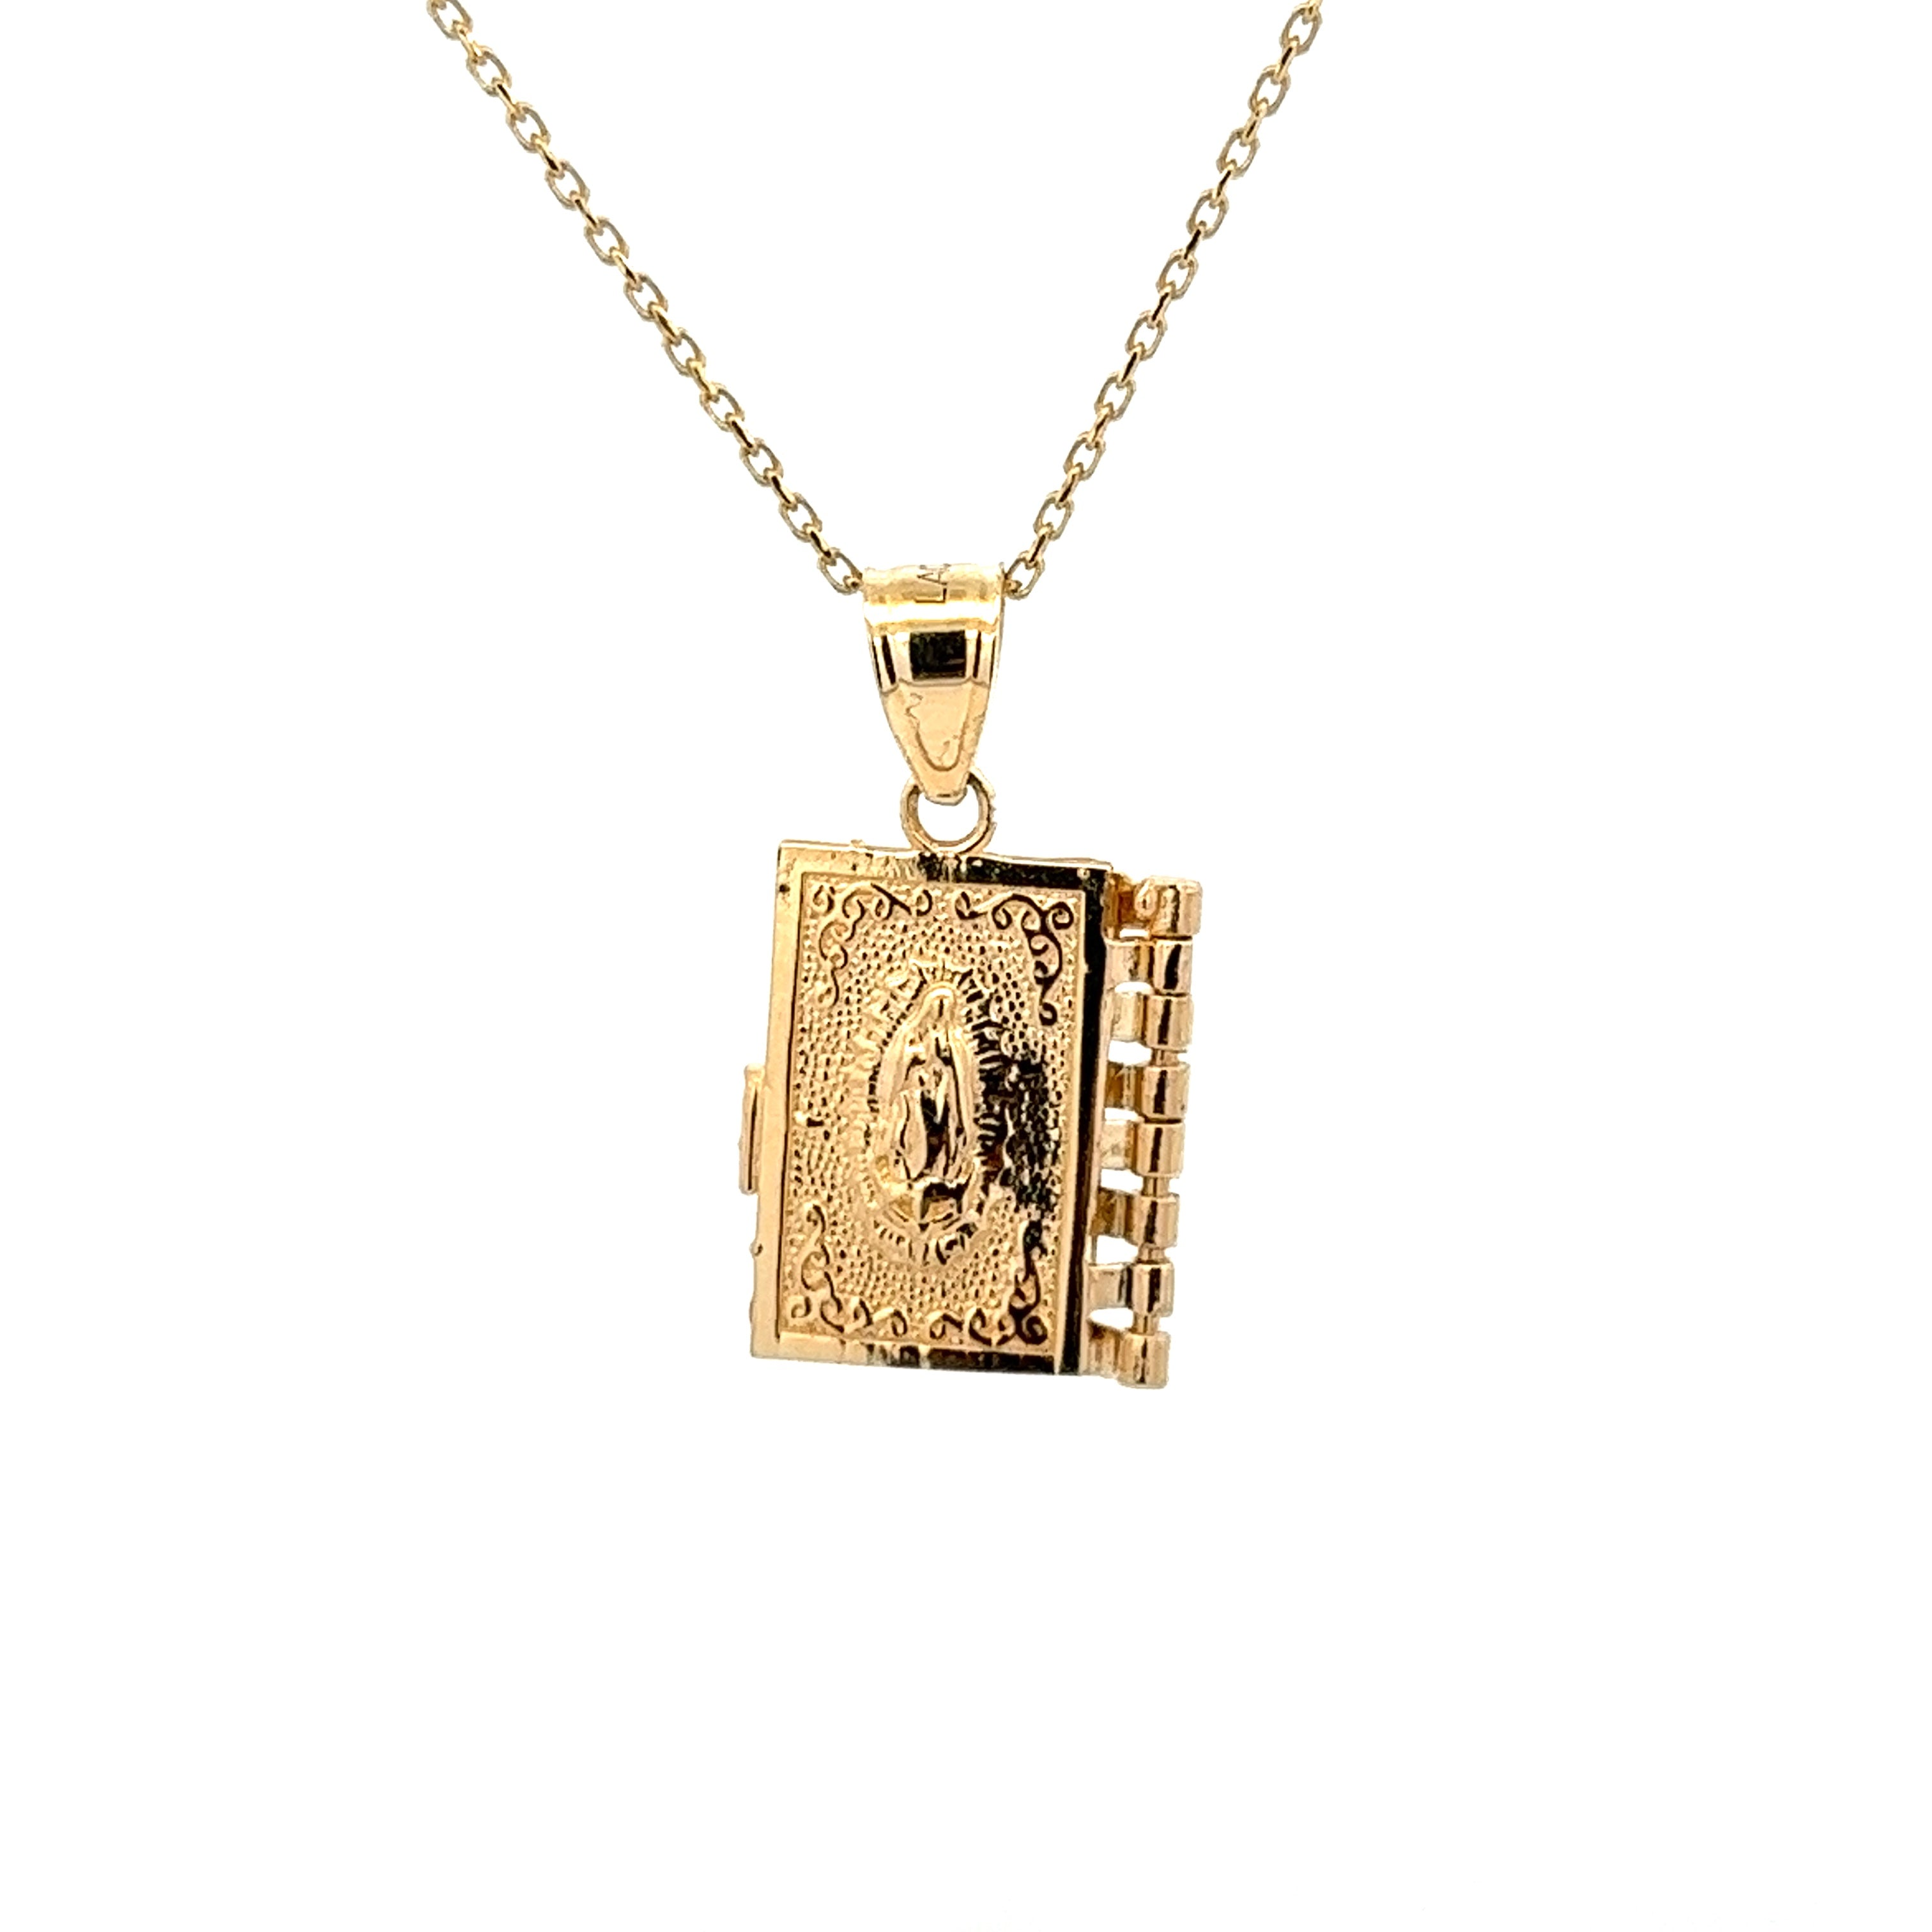 14K GOLD CHARM BOOK OF THE OUR FATHER